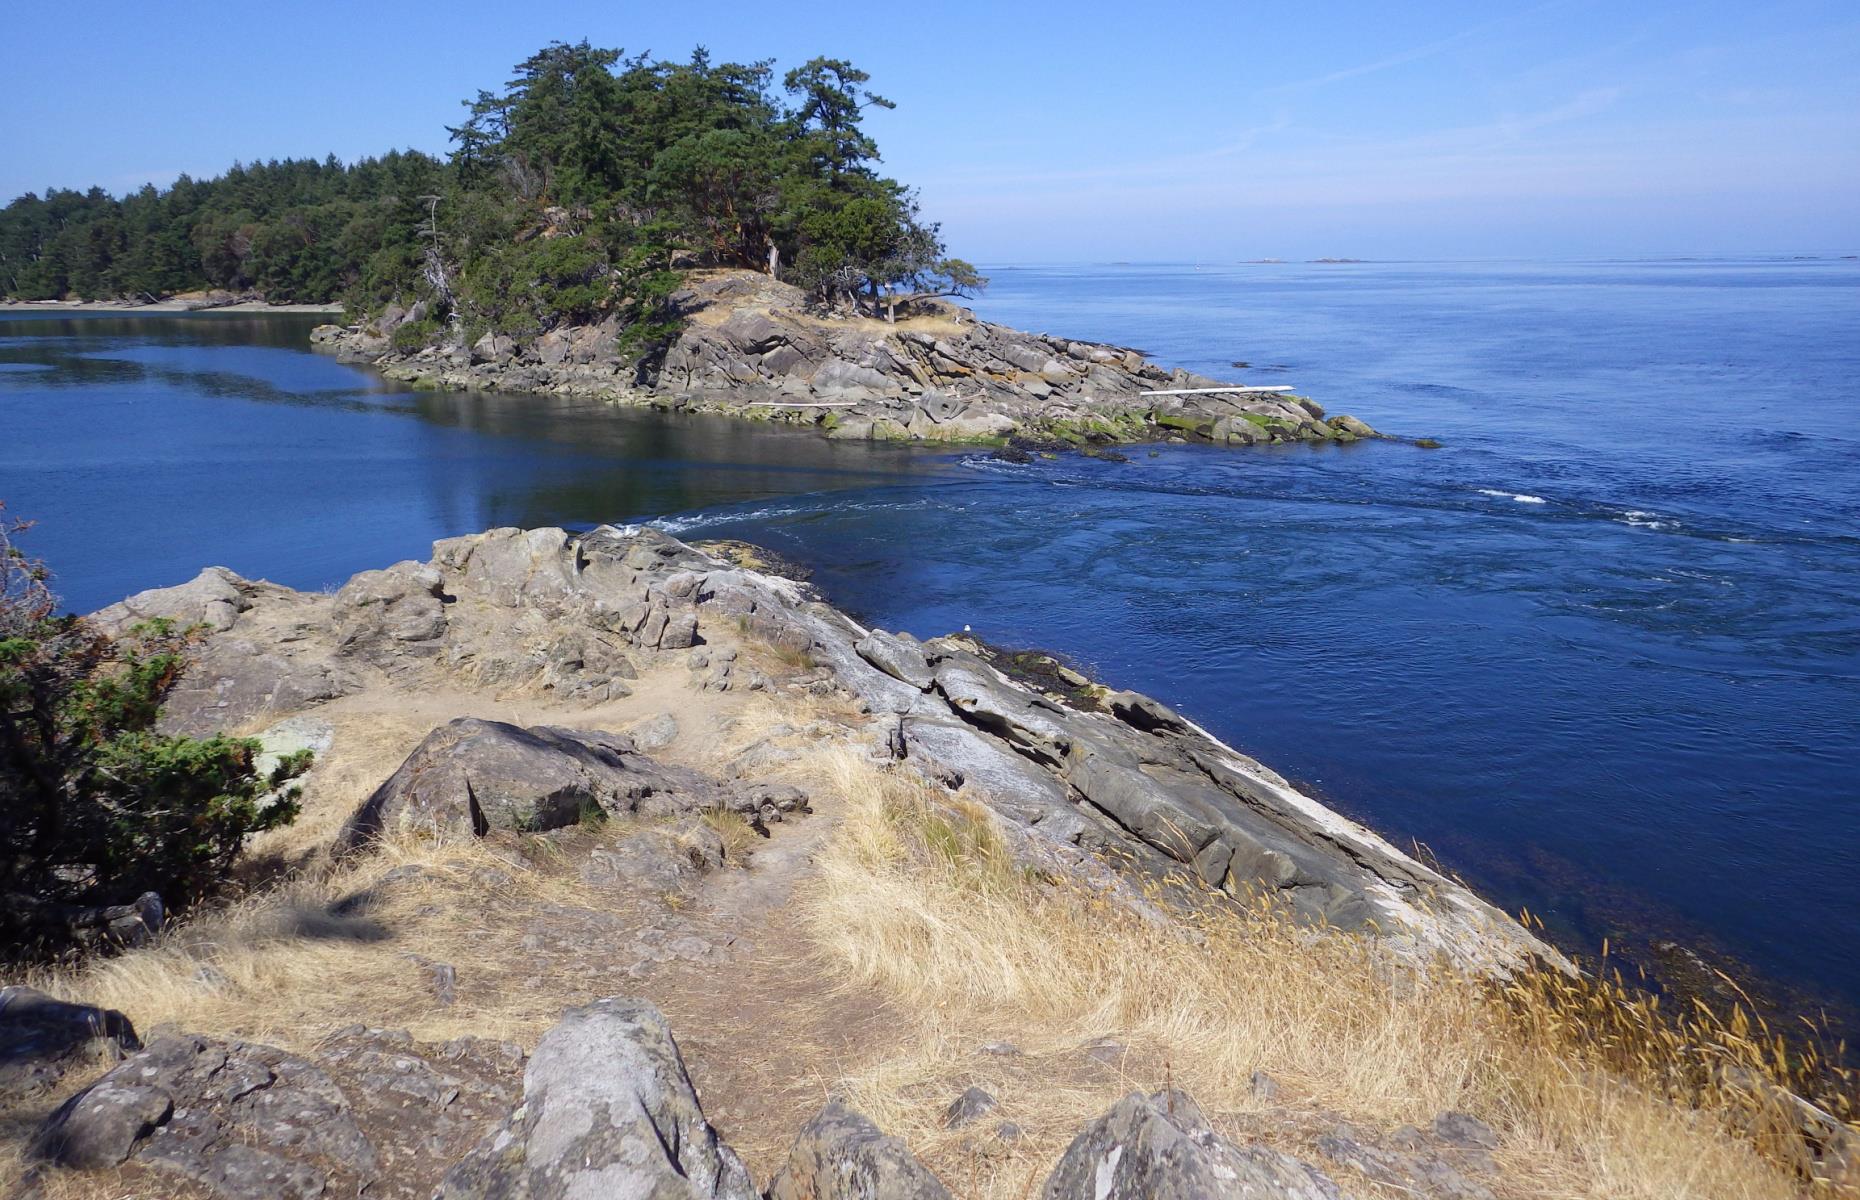 <p>The Gulf Islands are of tremendous importance to the Coast Salish peoples, both currently and historically. The cooperative relationships between Indigenous nations and Parks Canada <a href="https://wsanec.com/south-island-first-nations-sign-accord/">have not always been smooth</a> since the reserve was established: some local Indigenous groups argue that, while the park may protect ecosystems, it also obstructs their land use rights. The government continues to work with an <a href="https://parks.canada.ca/pn-np/bc/gulf/plan/e">Indigenous Management Board</a> to consult with Coast Salish groups that wish to be involved.</p>